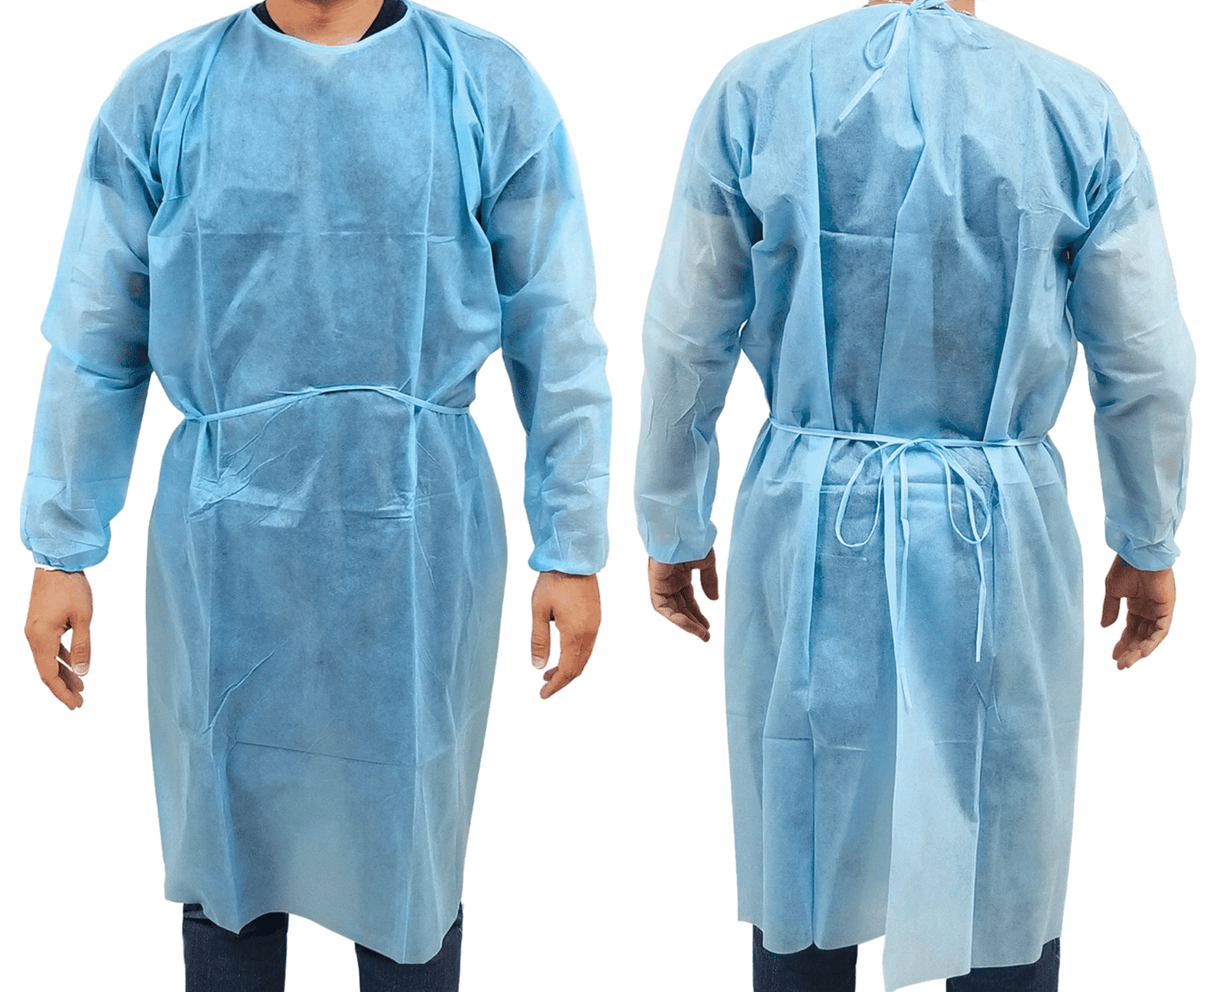 JNBS Disposable Isolation Gowns